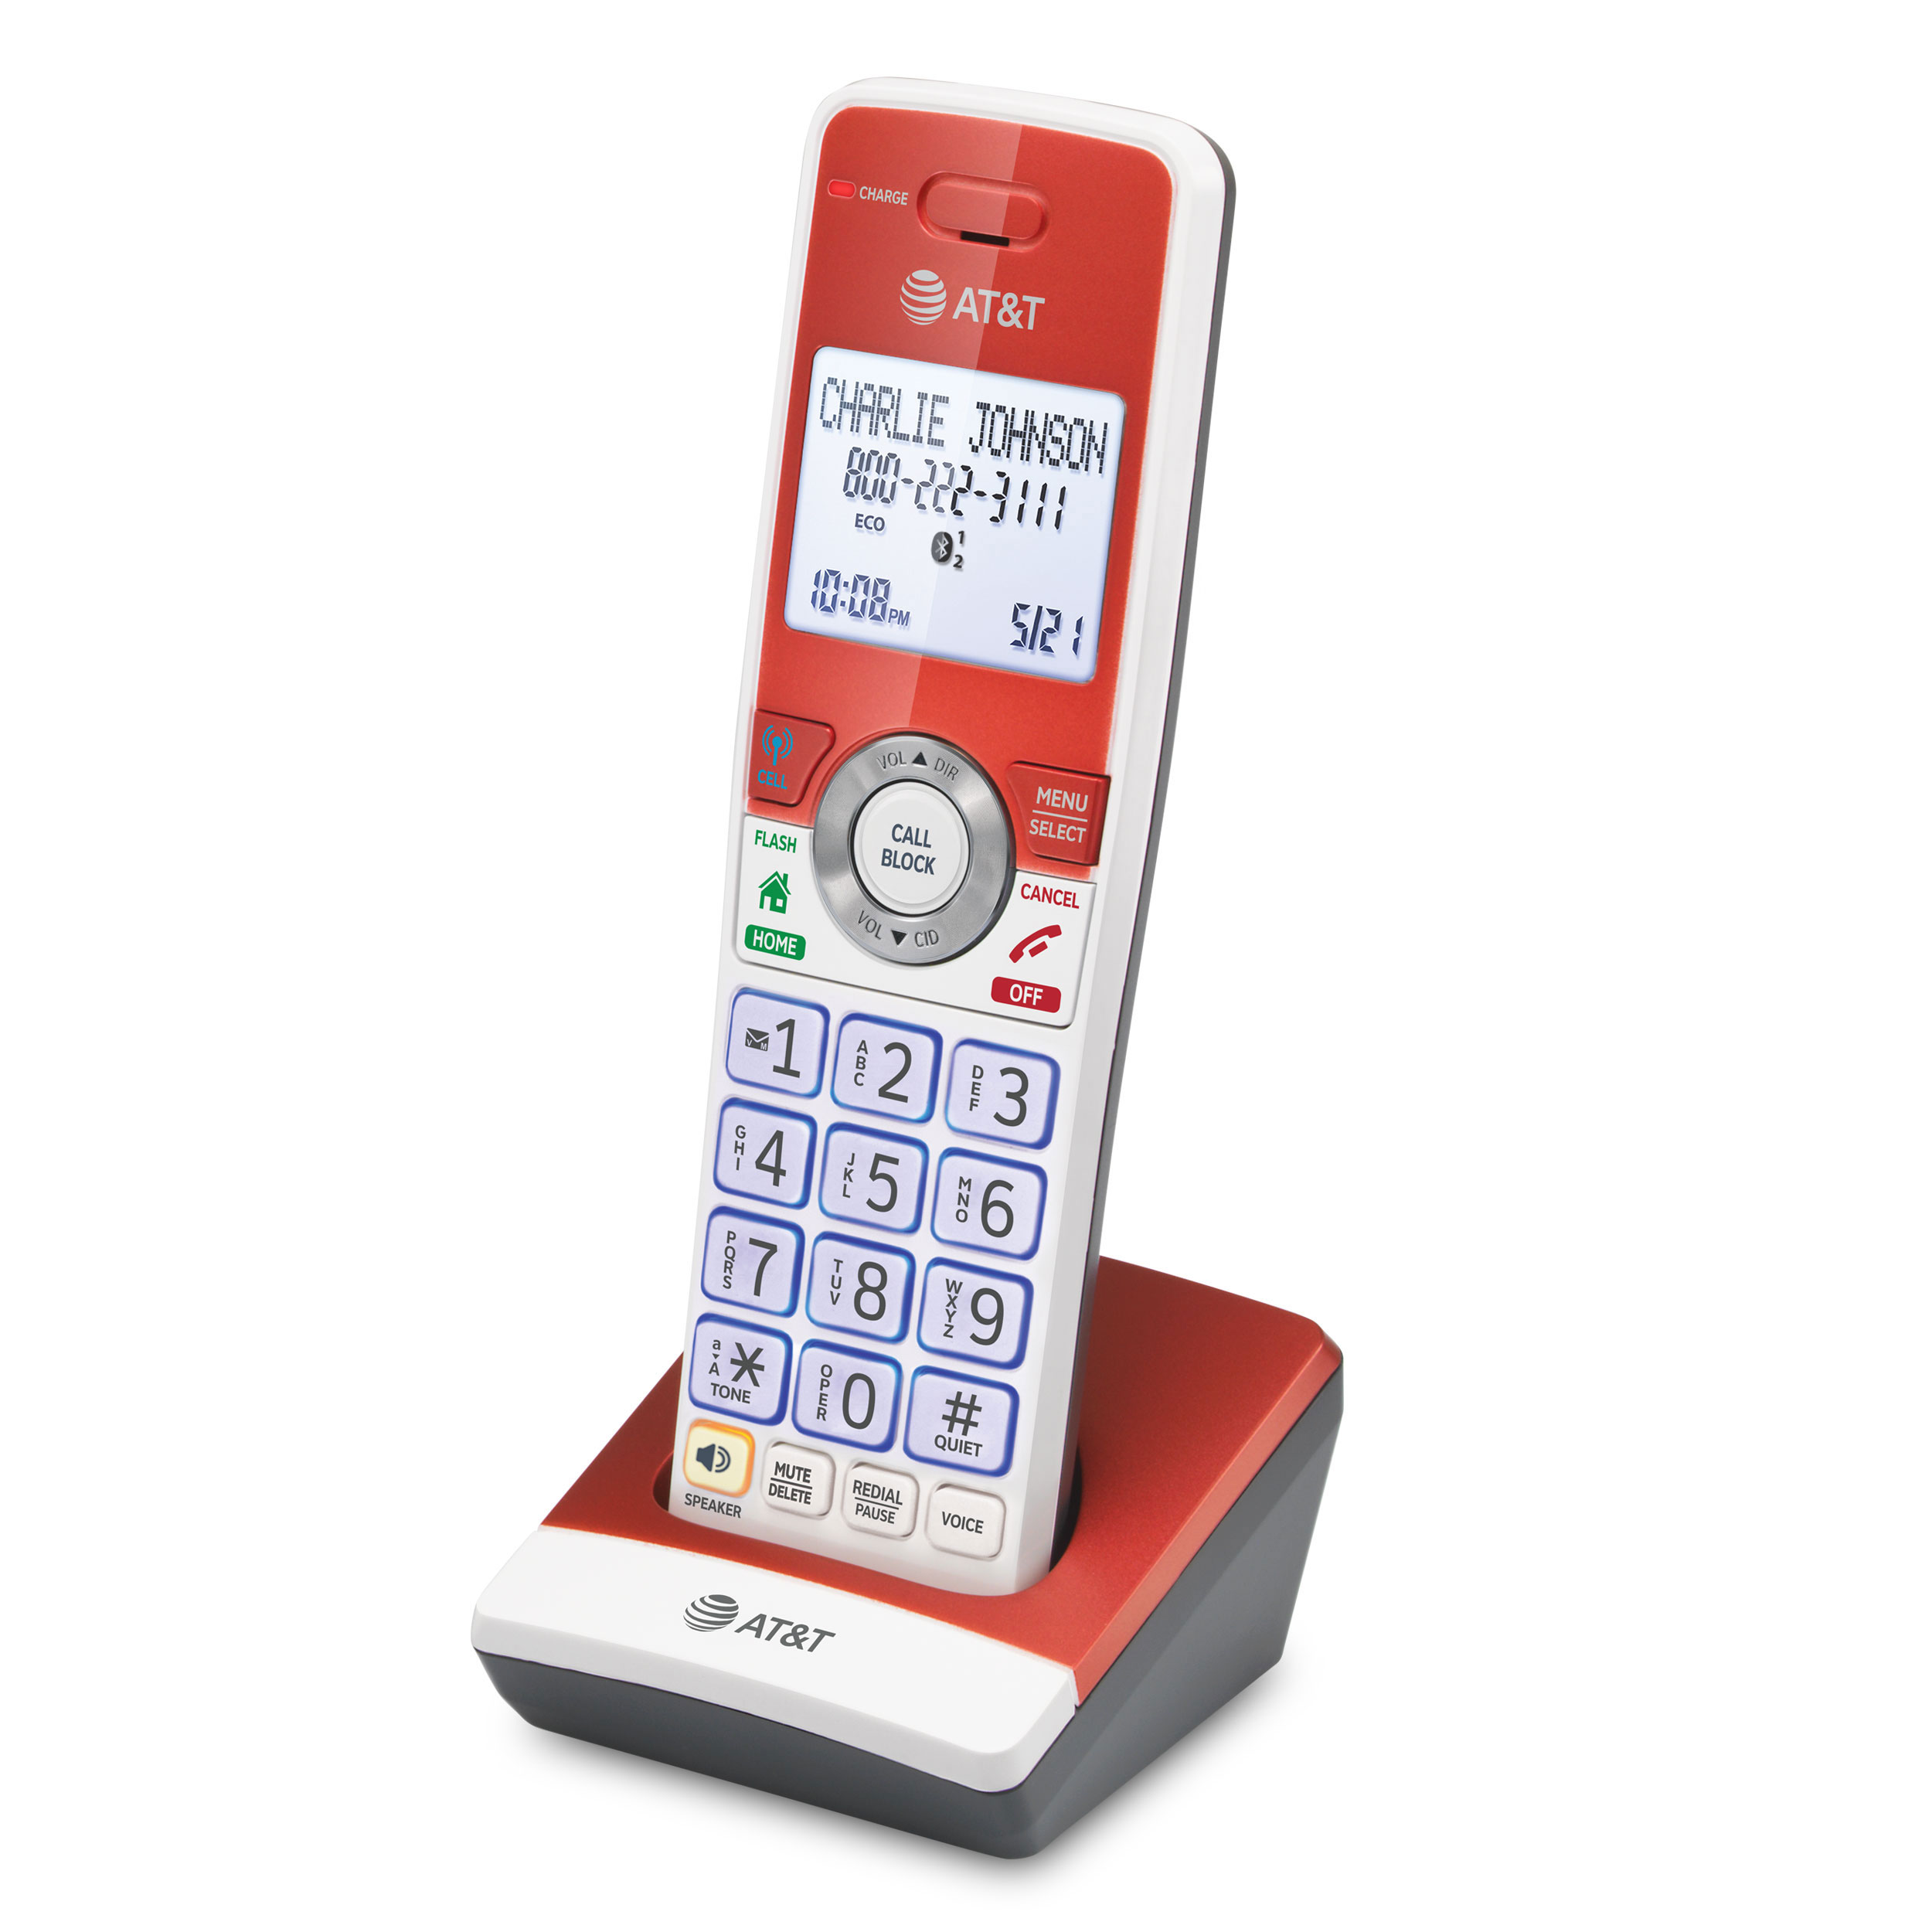 4-Handset Expandable Cordless Phone with Unsurpassed Range, Bluetooth Connect to Cell™, Smart Call Blocker and Answering System - view 7